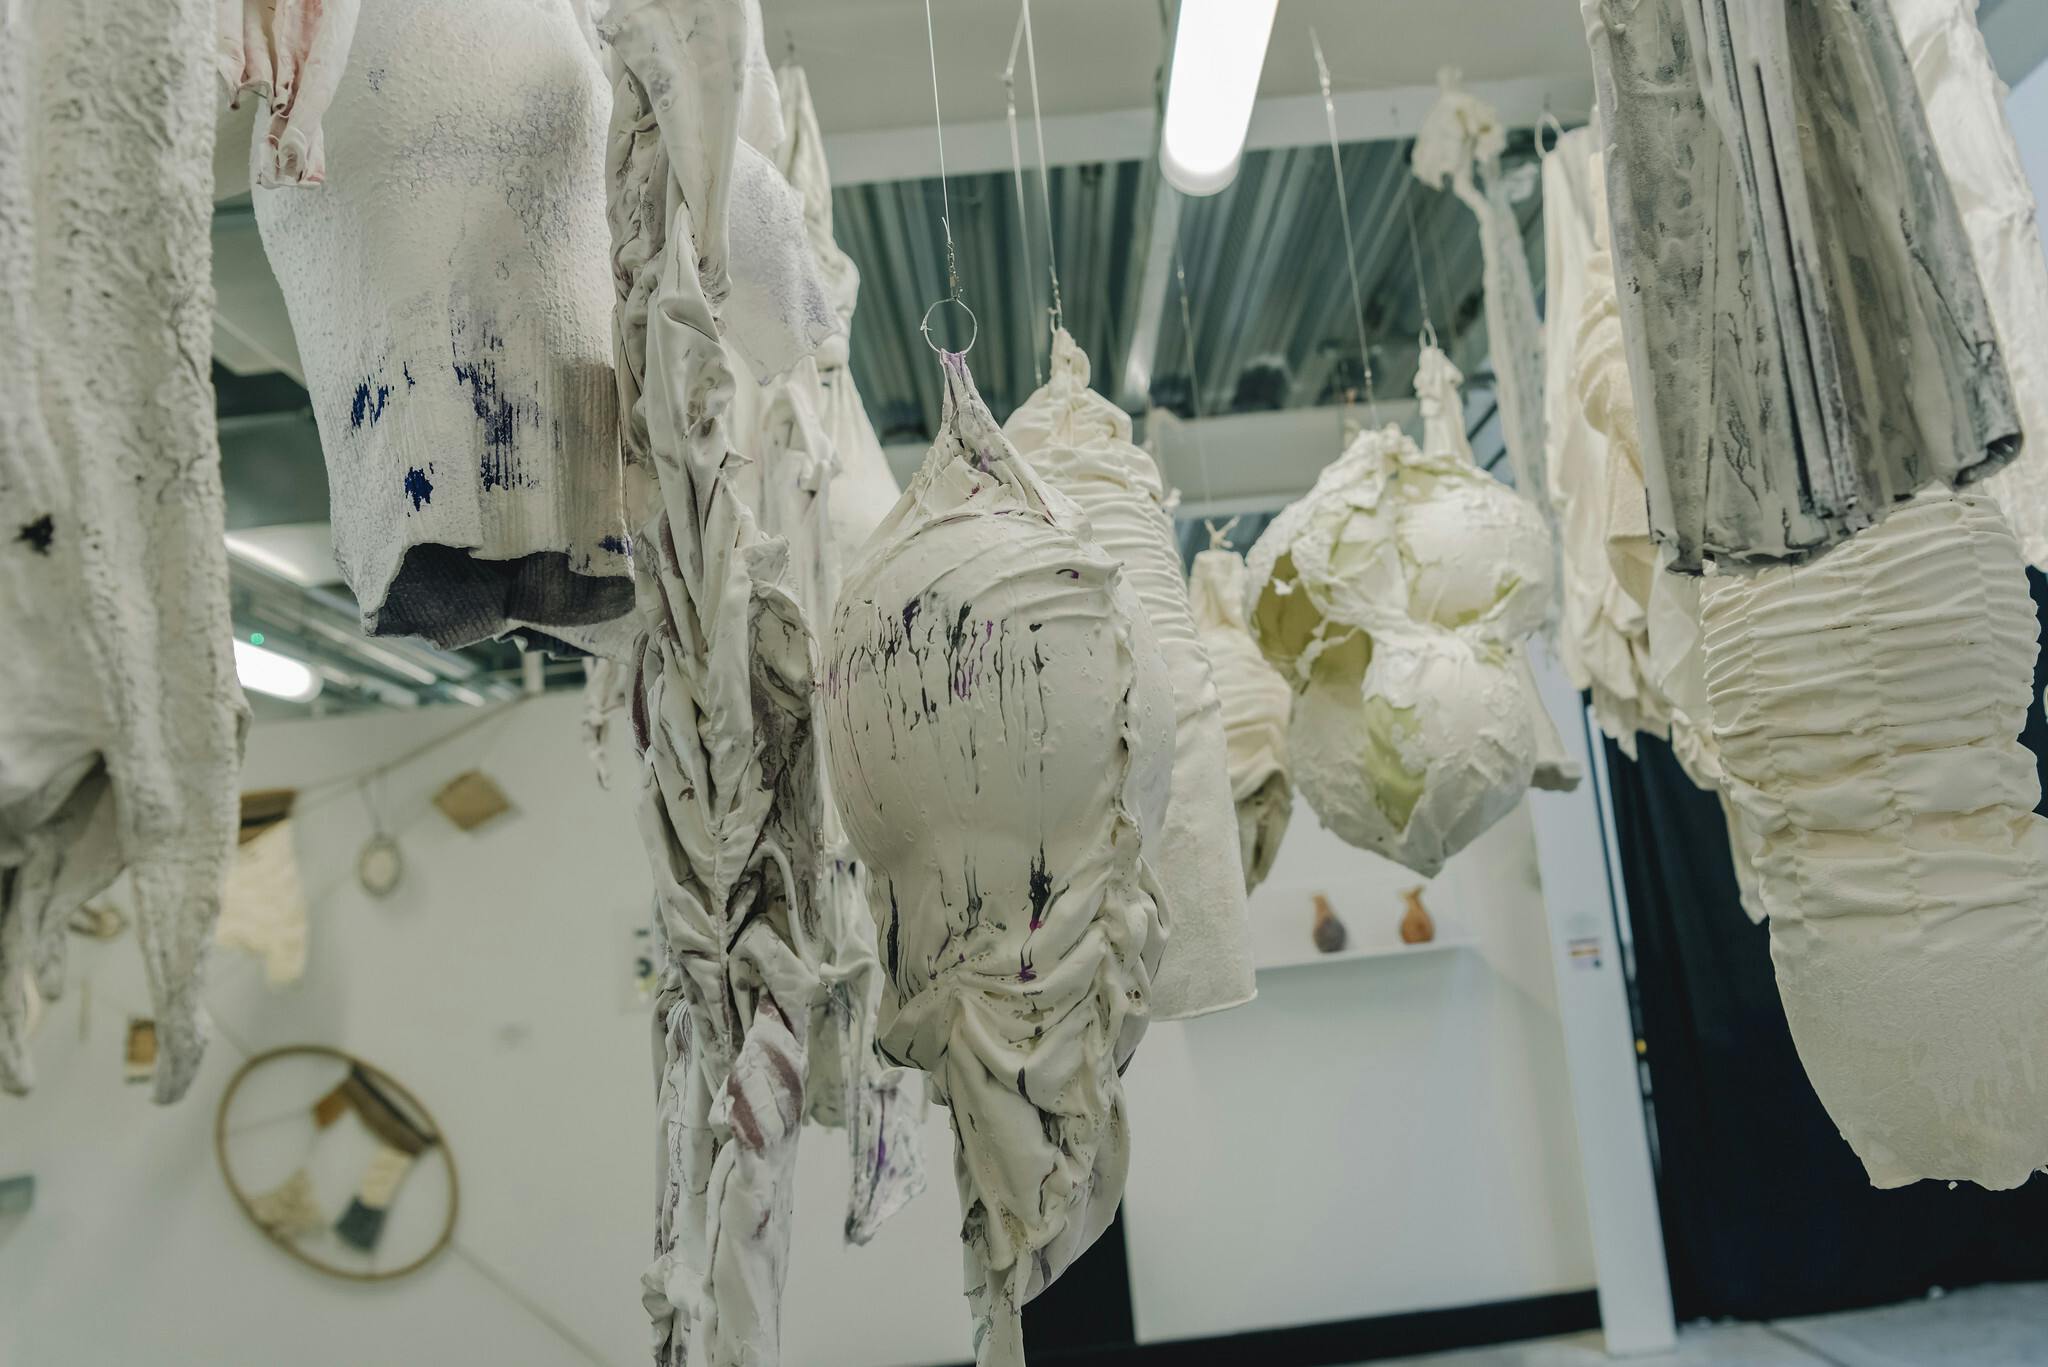 White misshapen sculptures hang from the ceiling in a white studio